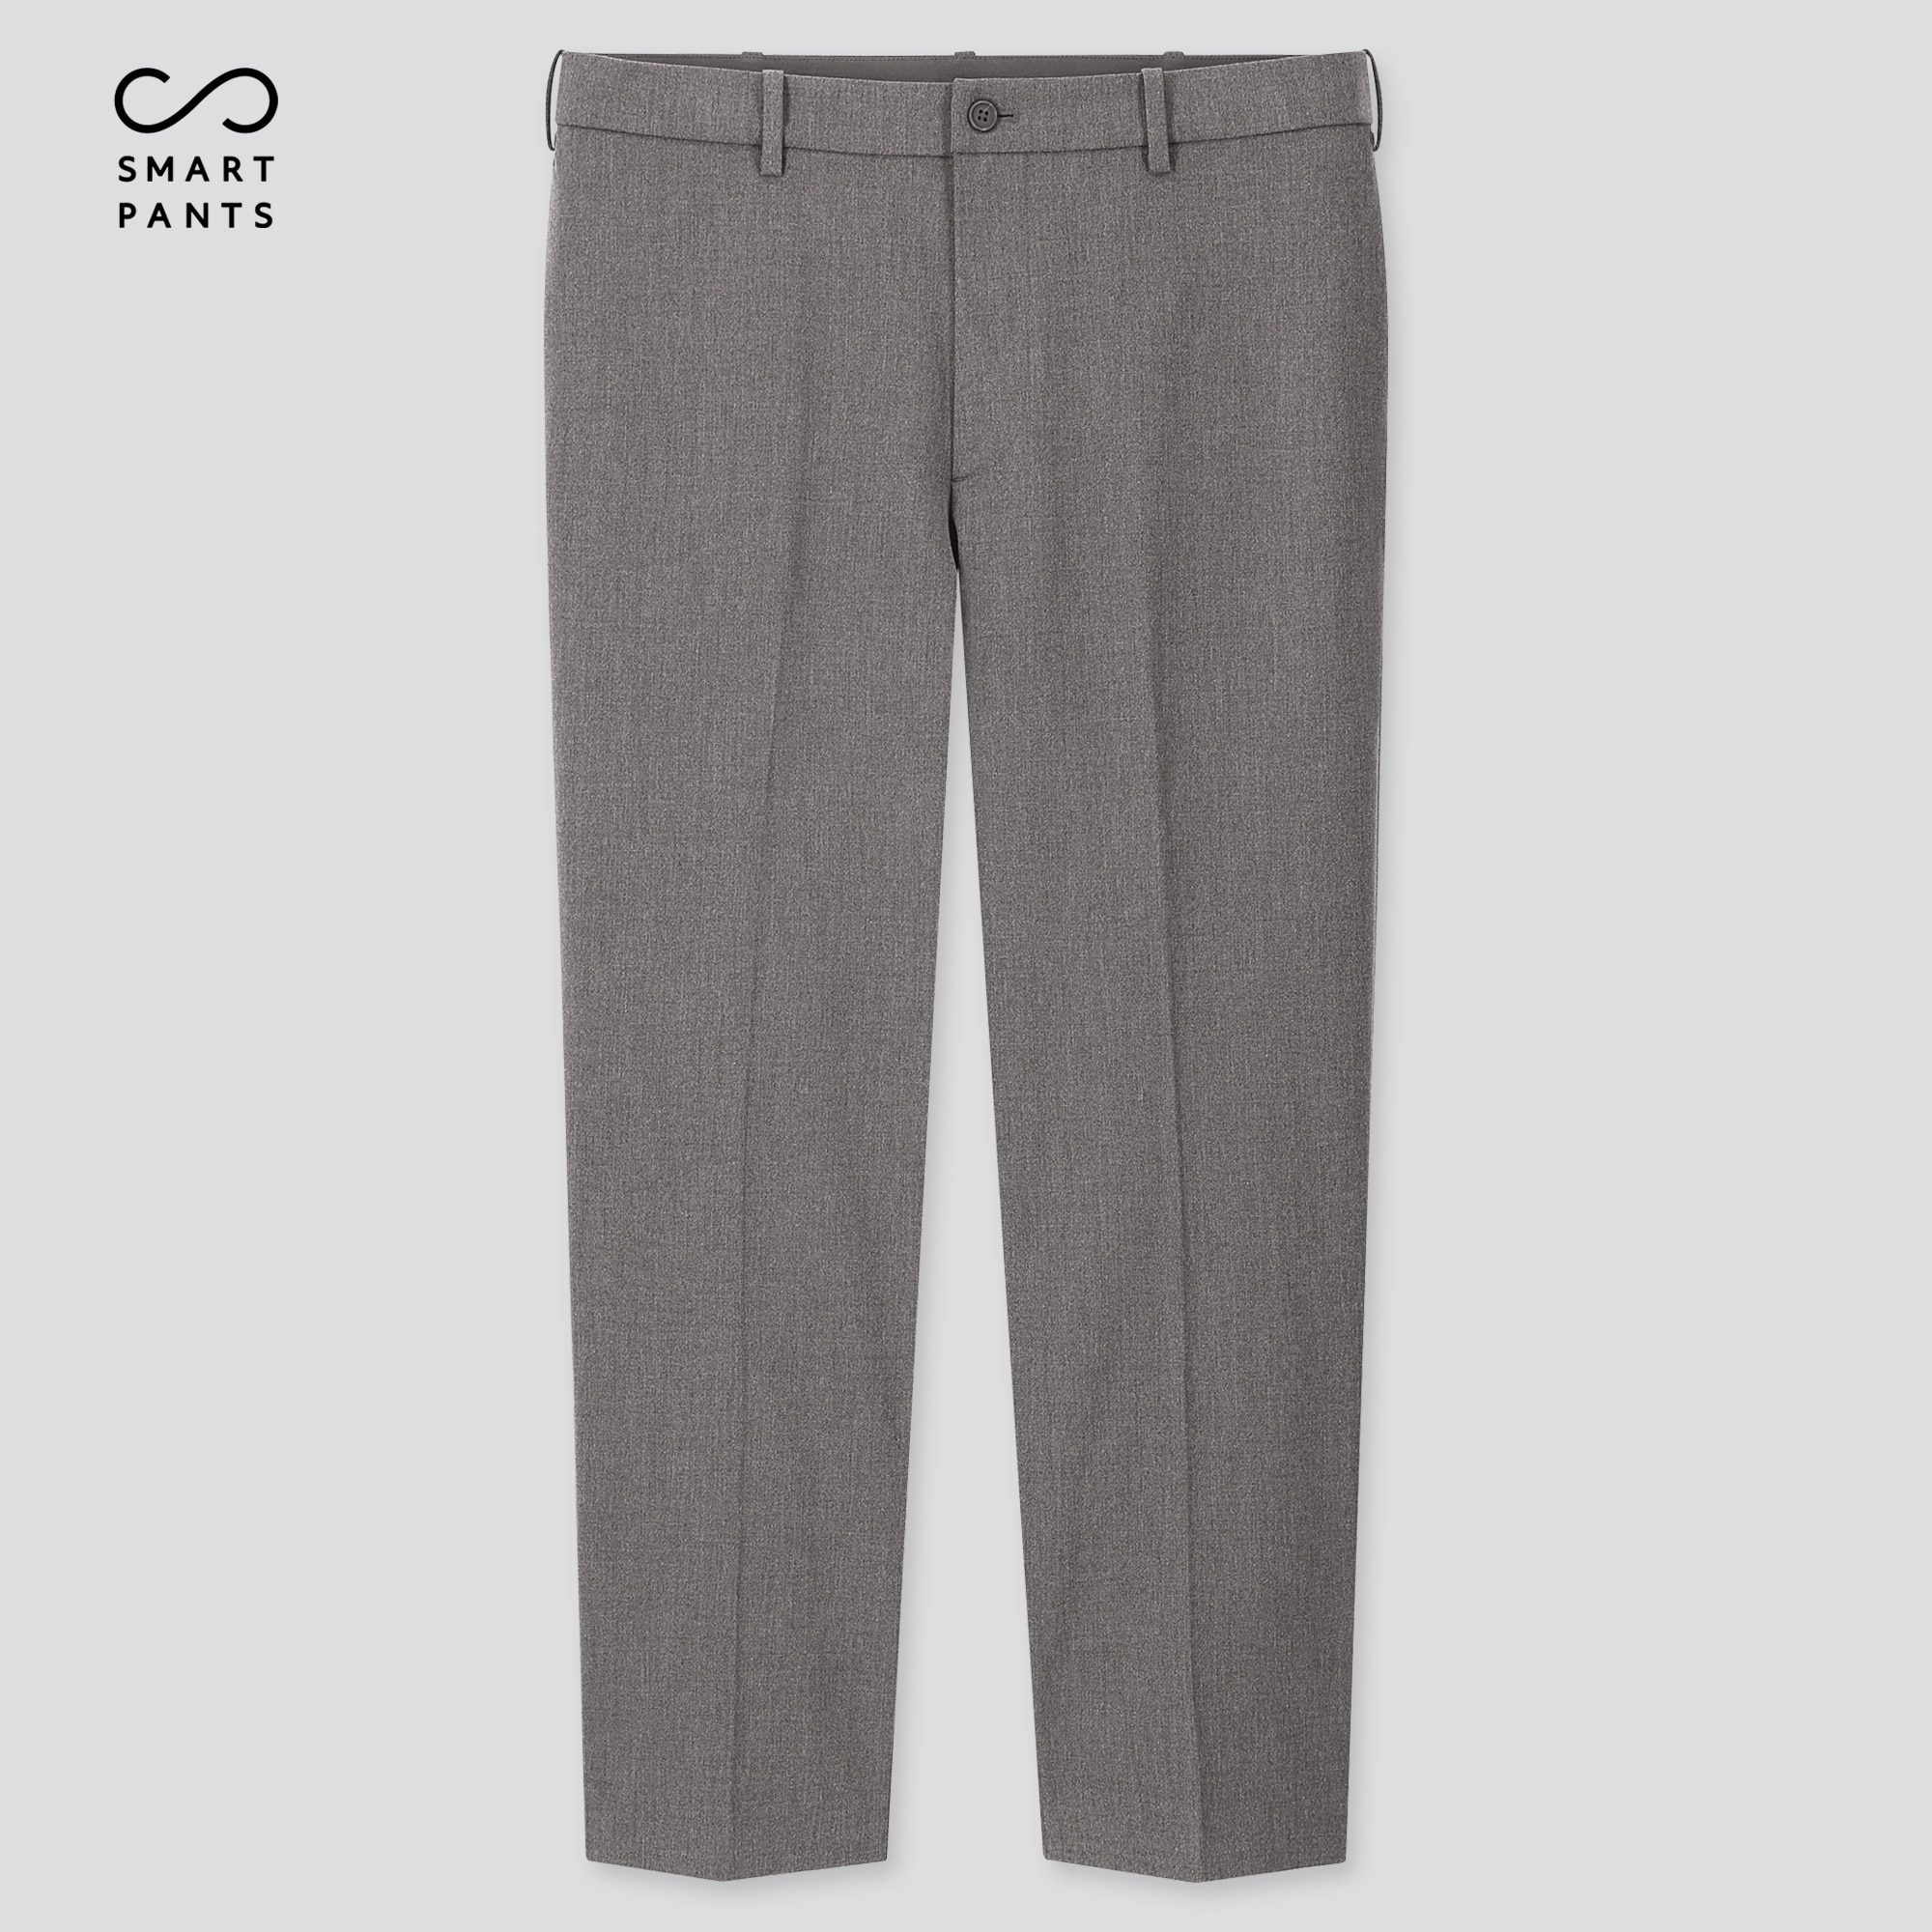 Smart 2-Way Stretch Ankle Pants (Tall)